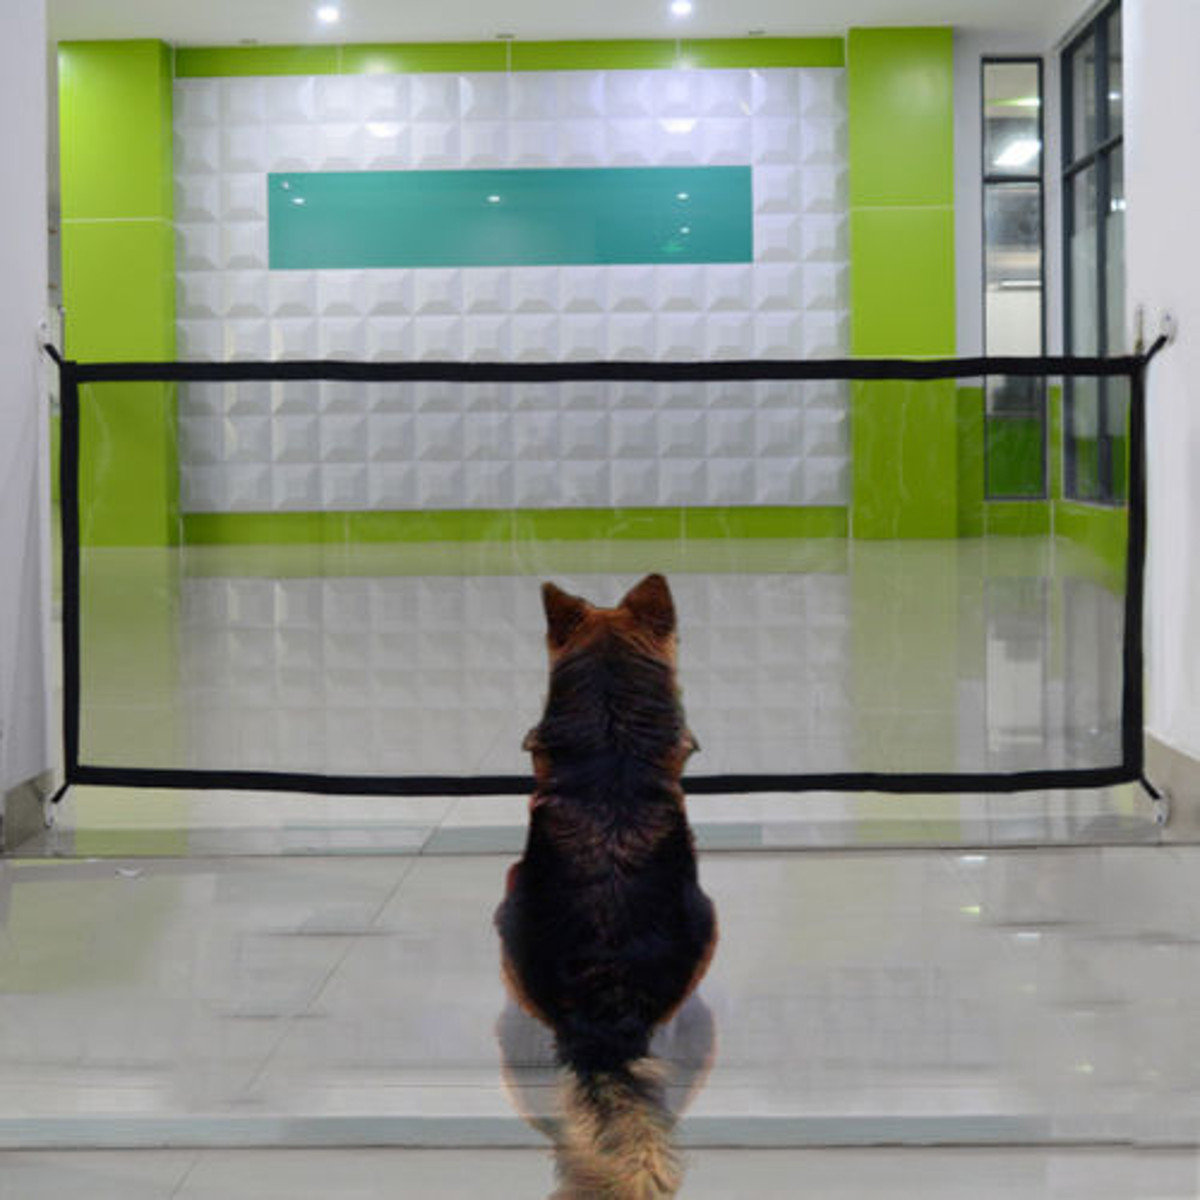 Portable Folding Magic Safety Gate Guard Mesh Fence Net For Pets Dog Puppy Cat